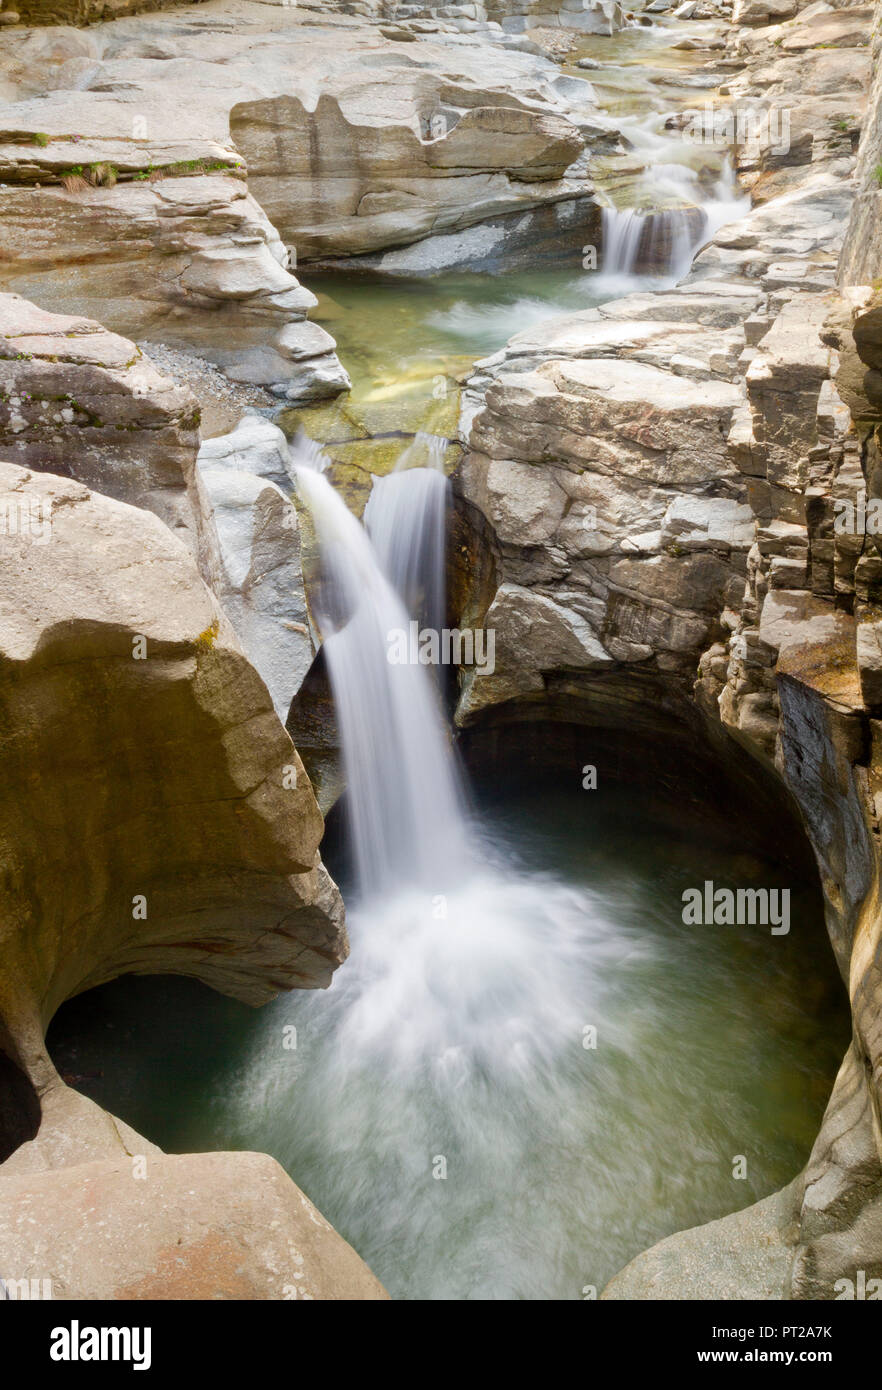 A small water fall in the Cavaglia potholes in Poschiavo valley, Switzerland, Europe Stock Photo